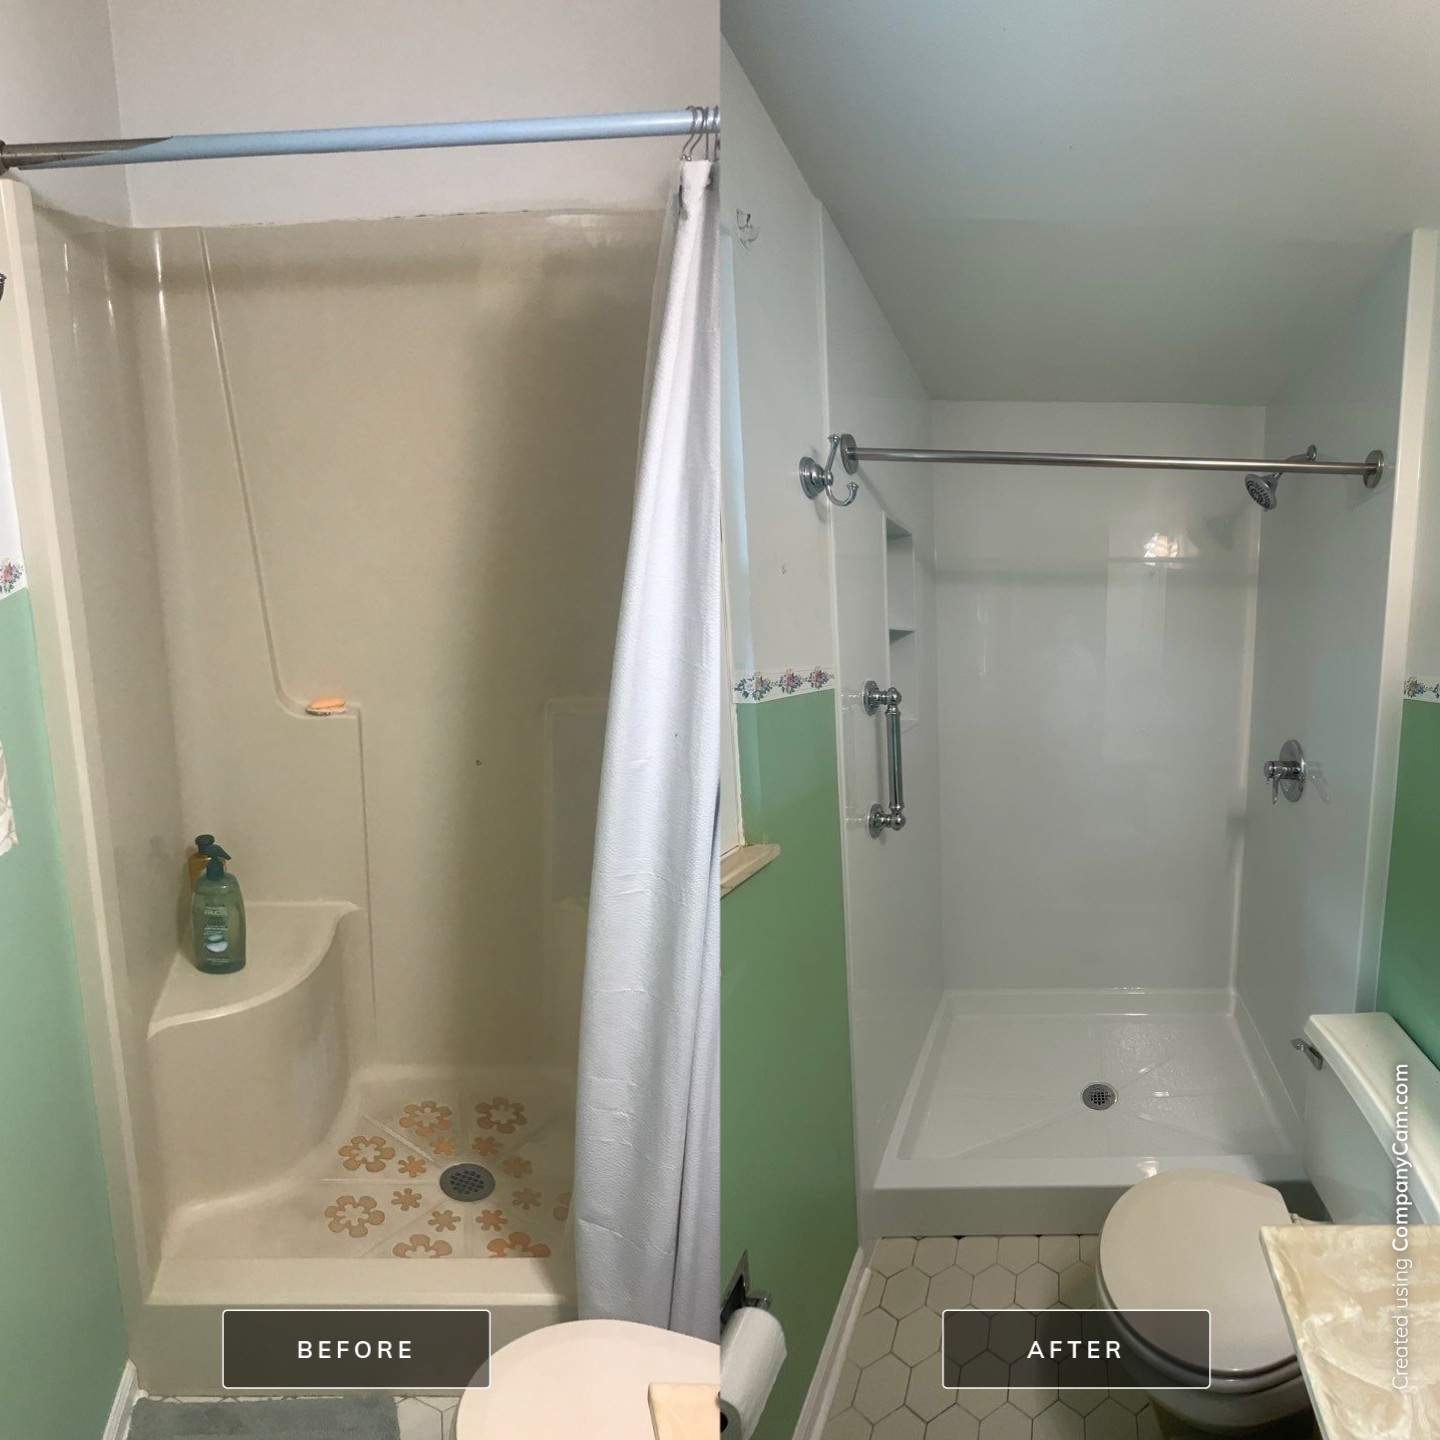 Before and After Walk-In Shower